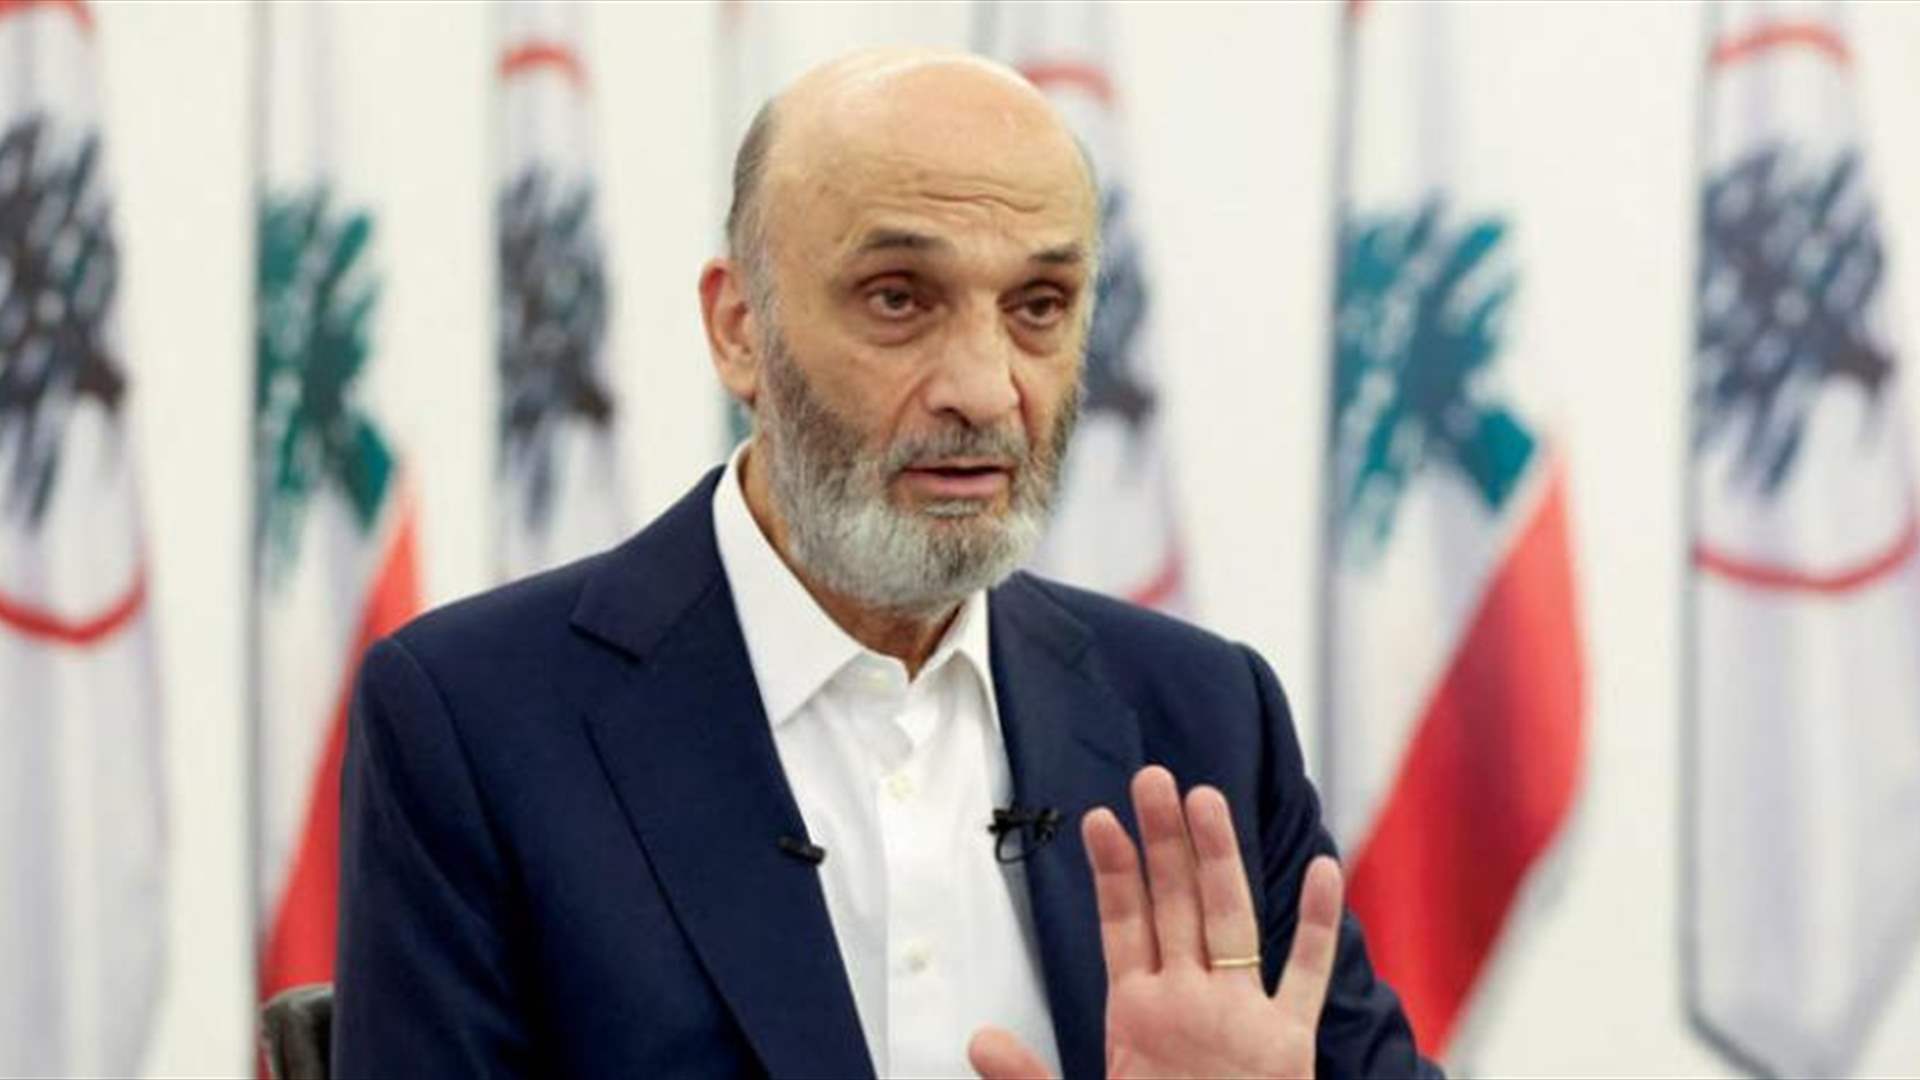 Geagea condemns Hezbollah&#39;s military moves: A costly misstep for Lebanon